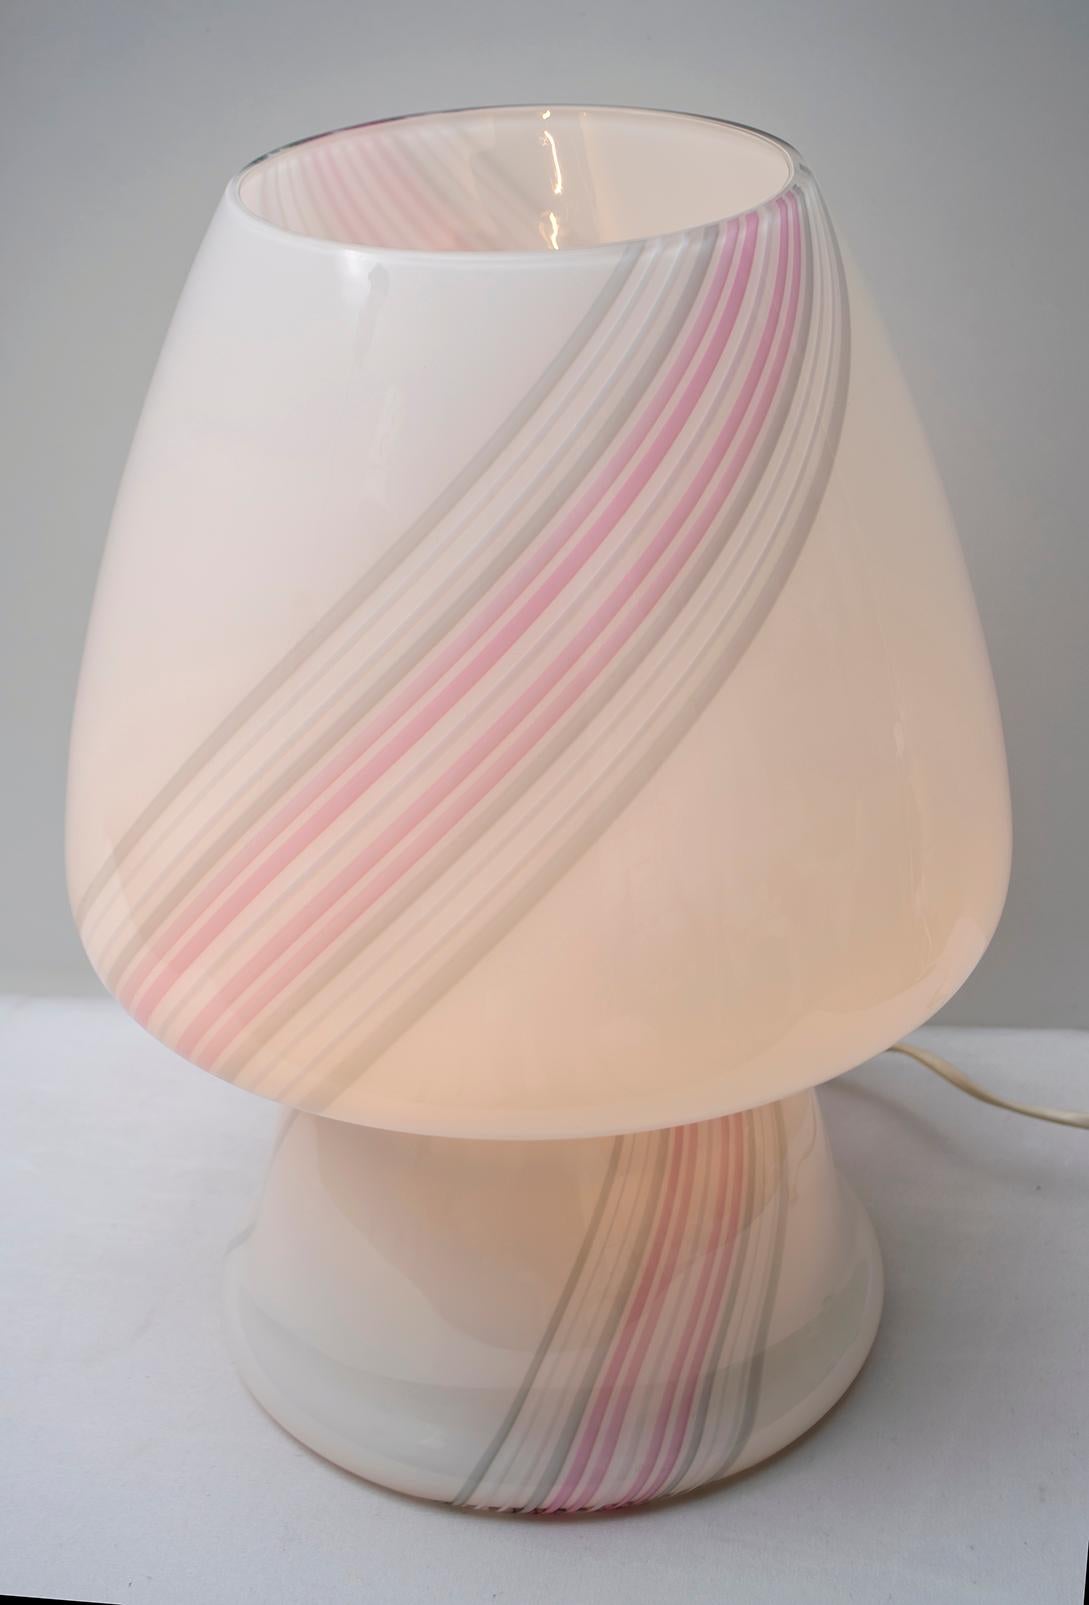 Large mushroom-shaped table lamp, handcrafted by the Murano Masters, made of Murano glass 